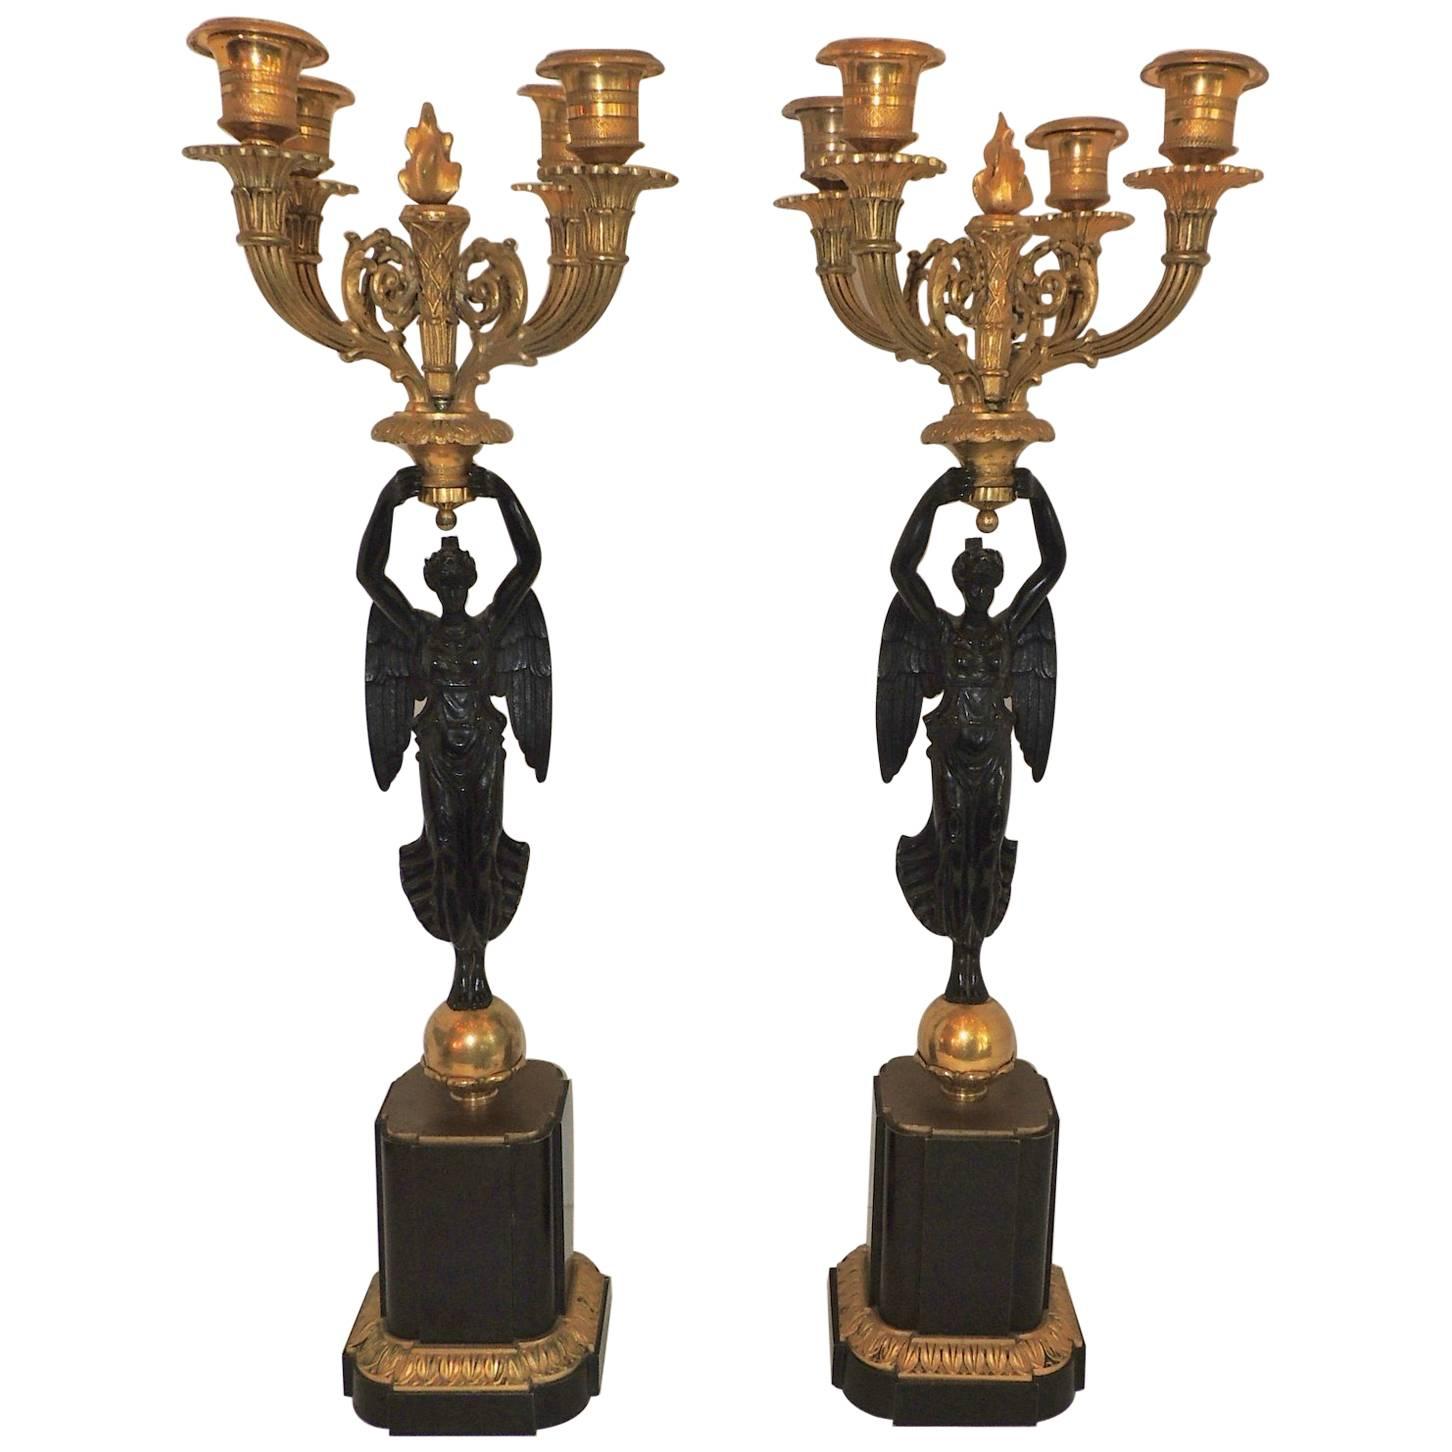 Wonderful Pair French Empire Dore Bronze Gilt Patinated Figural Candelabras